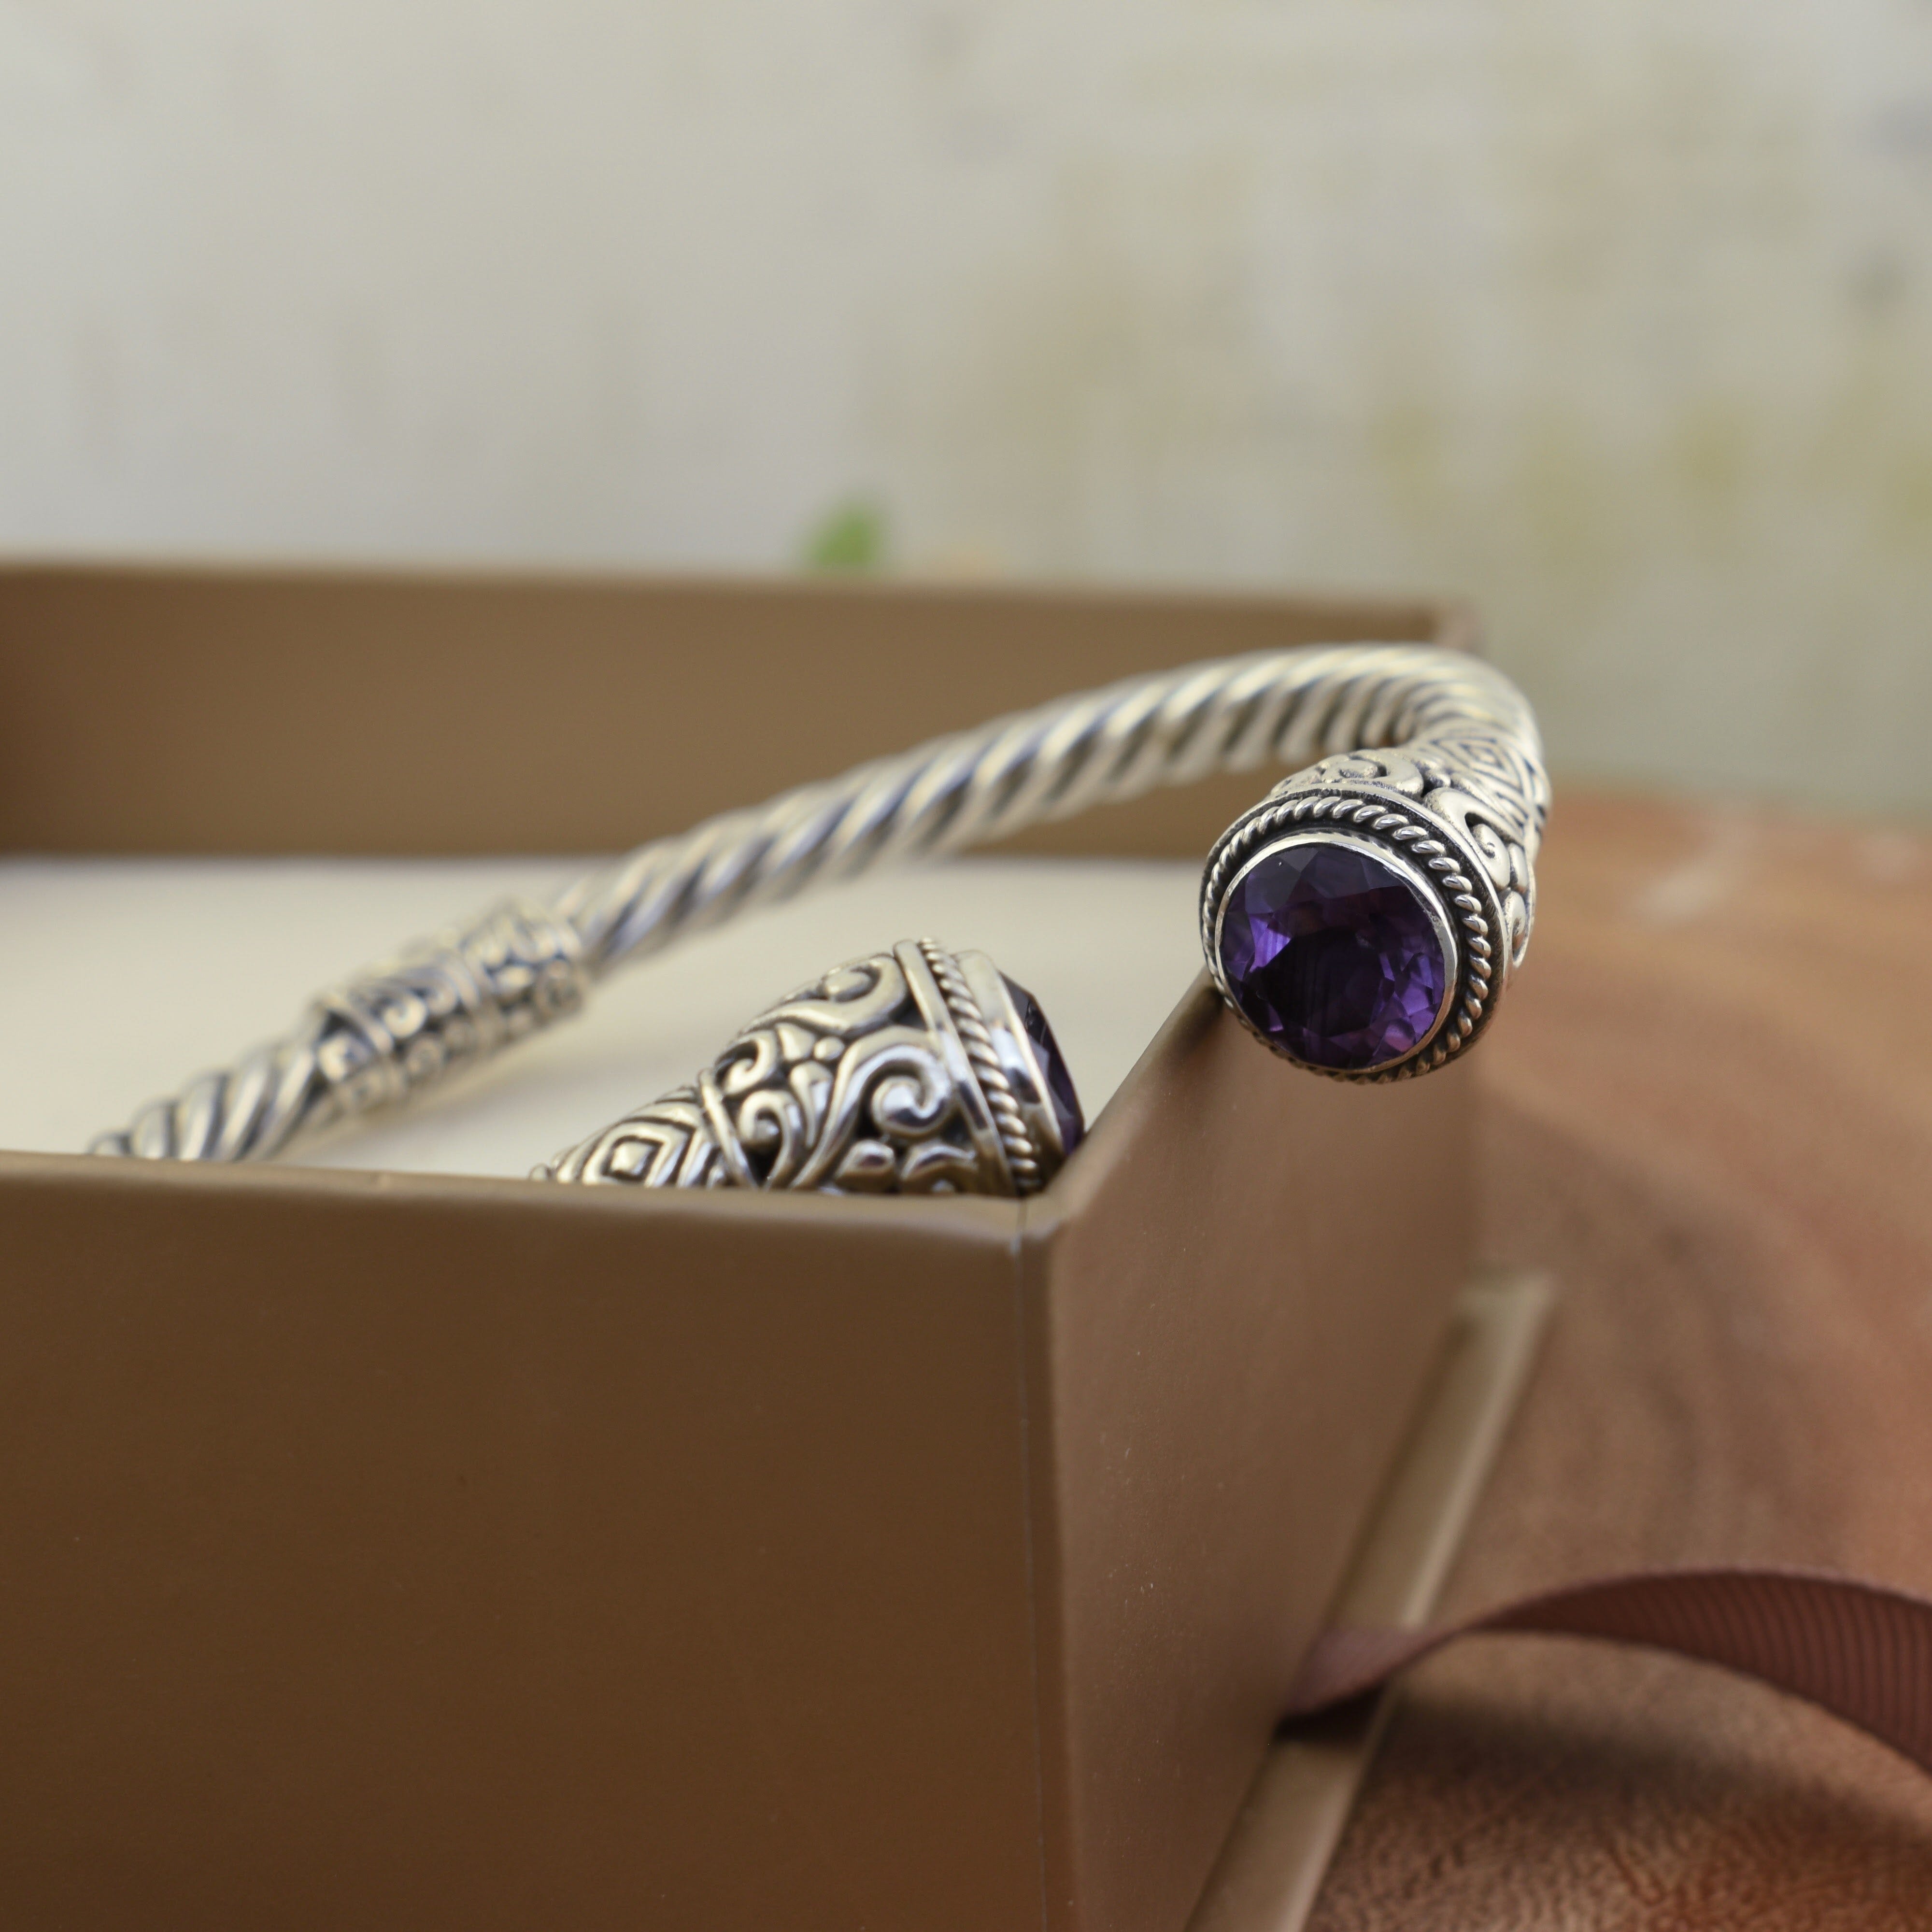 Twisted sterling silver cuff with purple amethyst